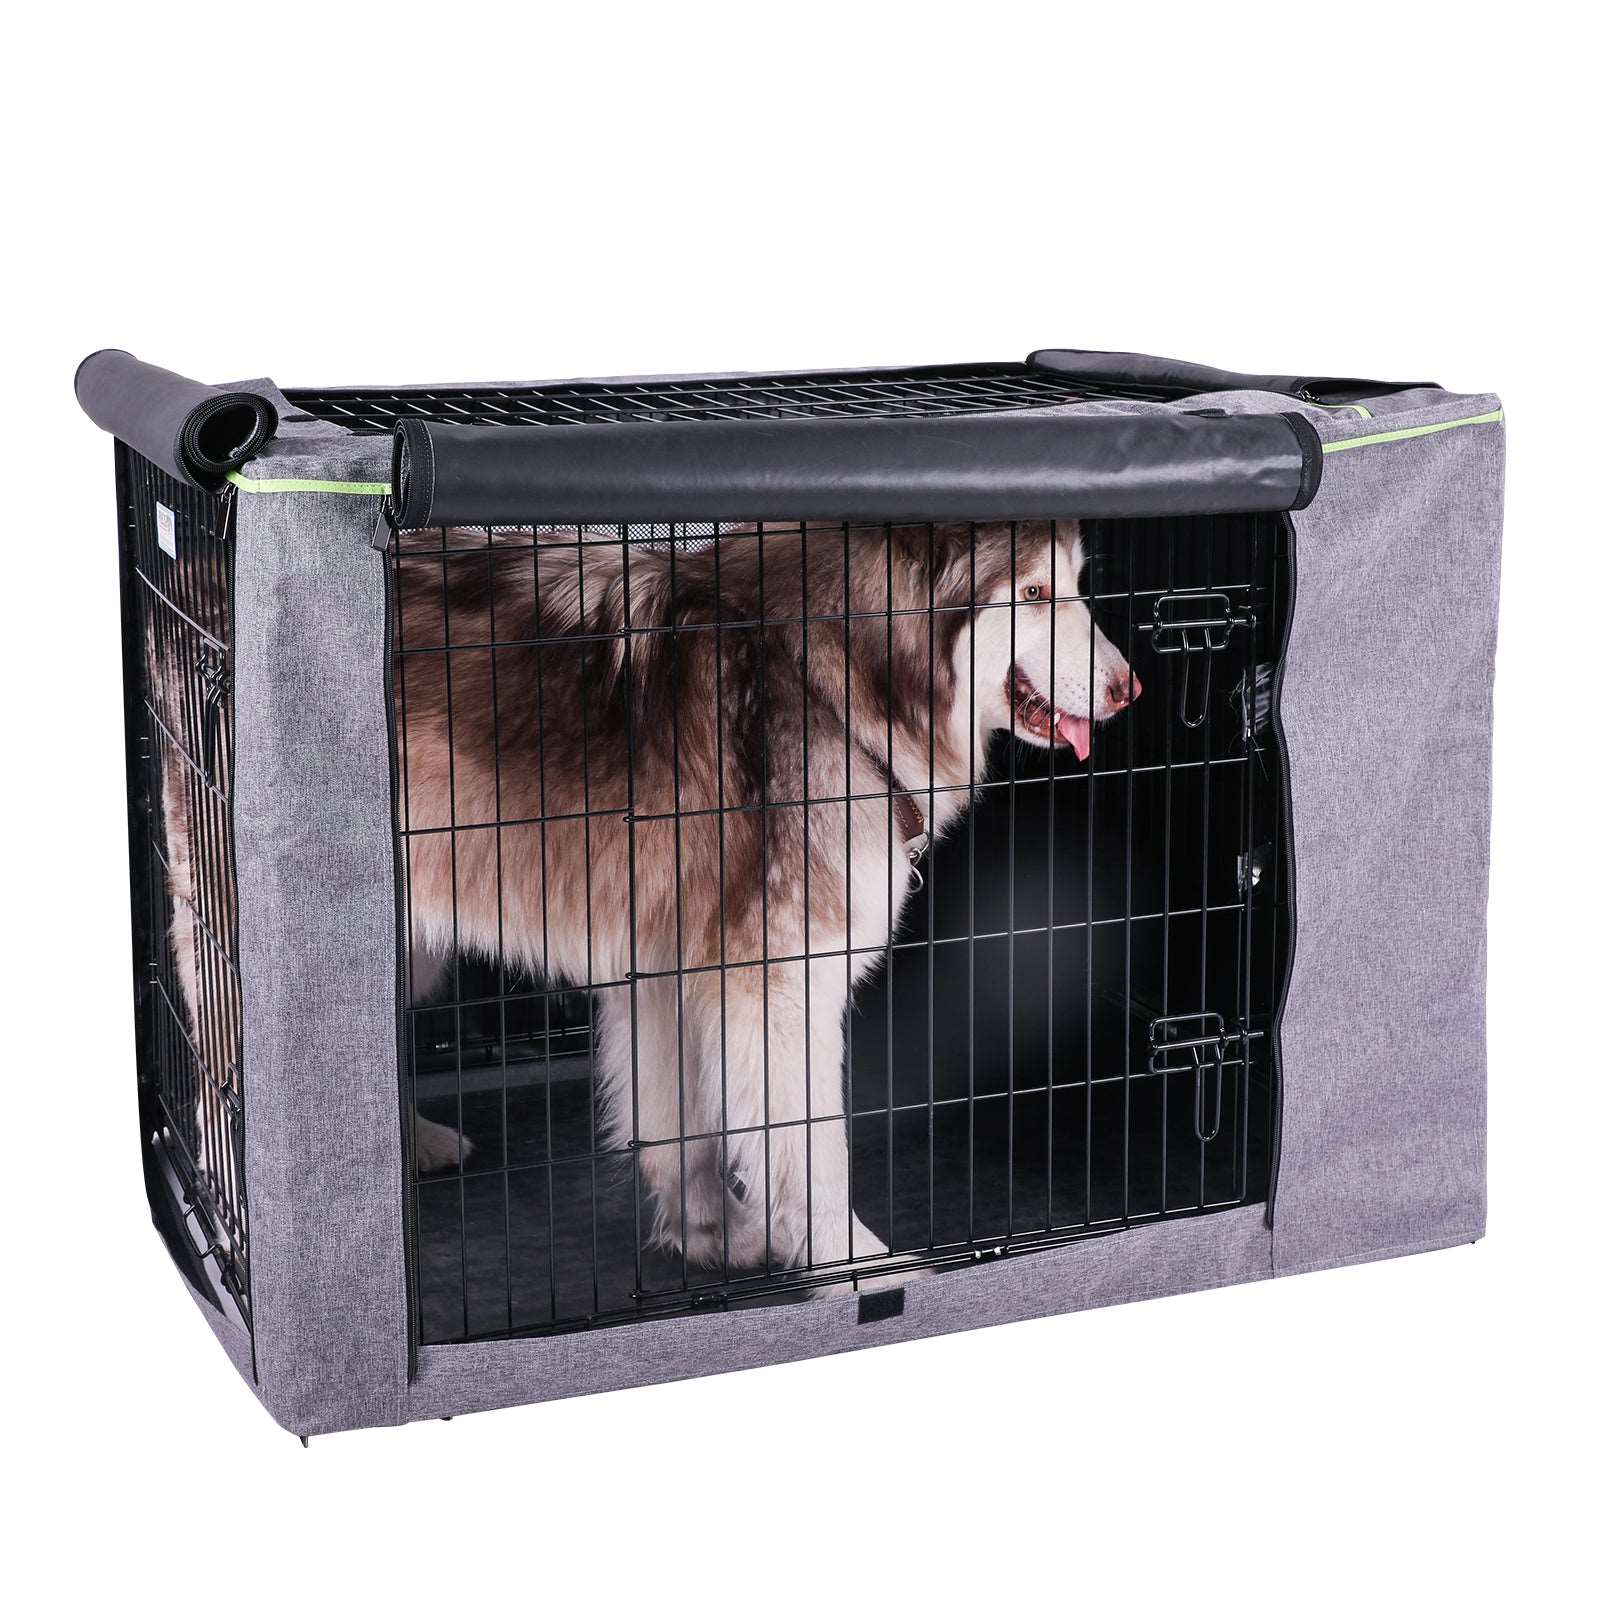 Petsfit-Dog-Crate-Cover-09